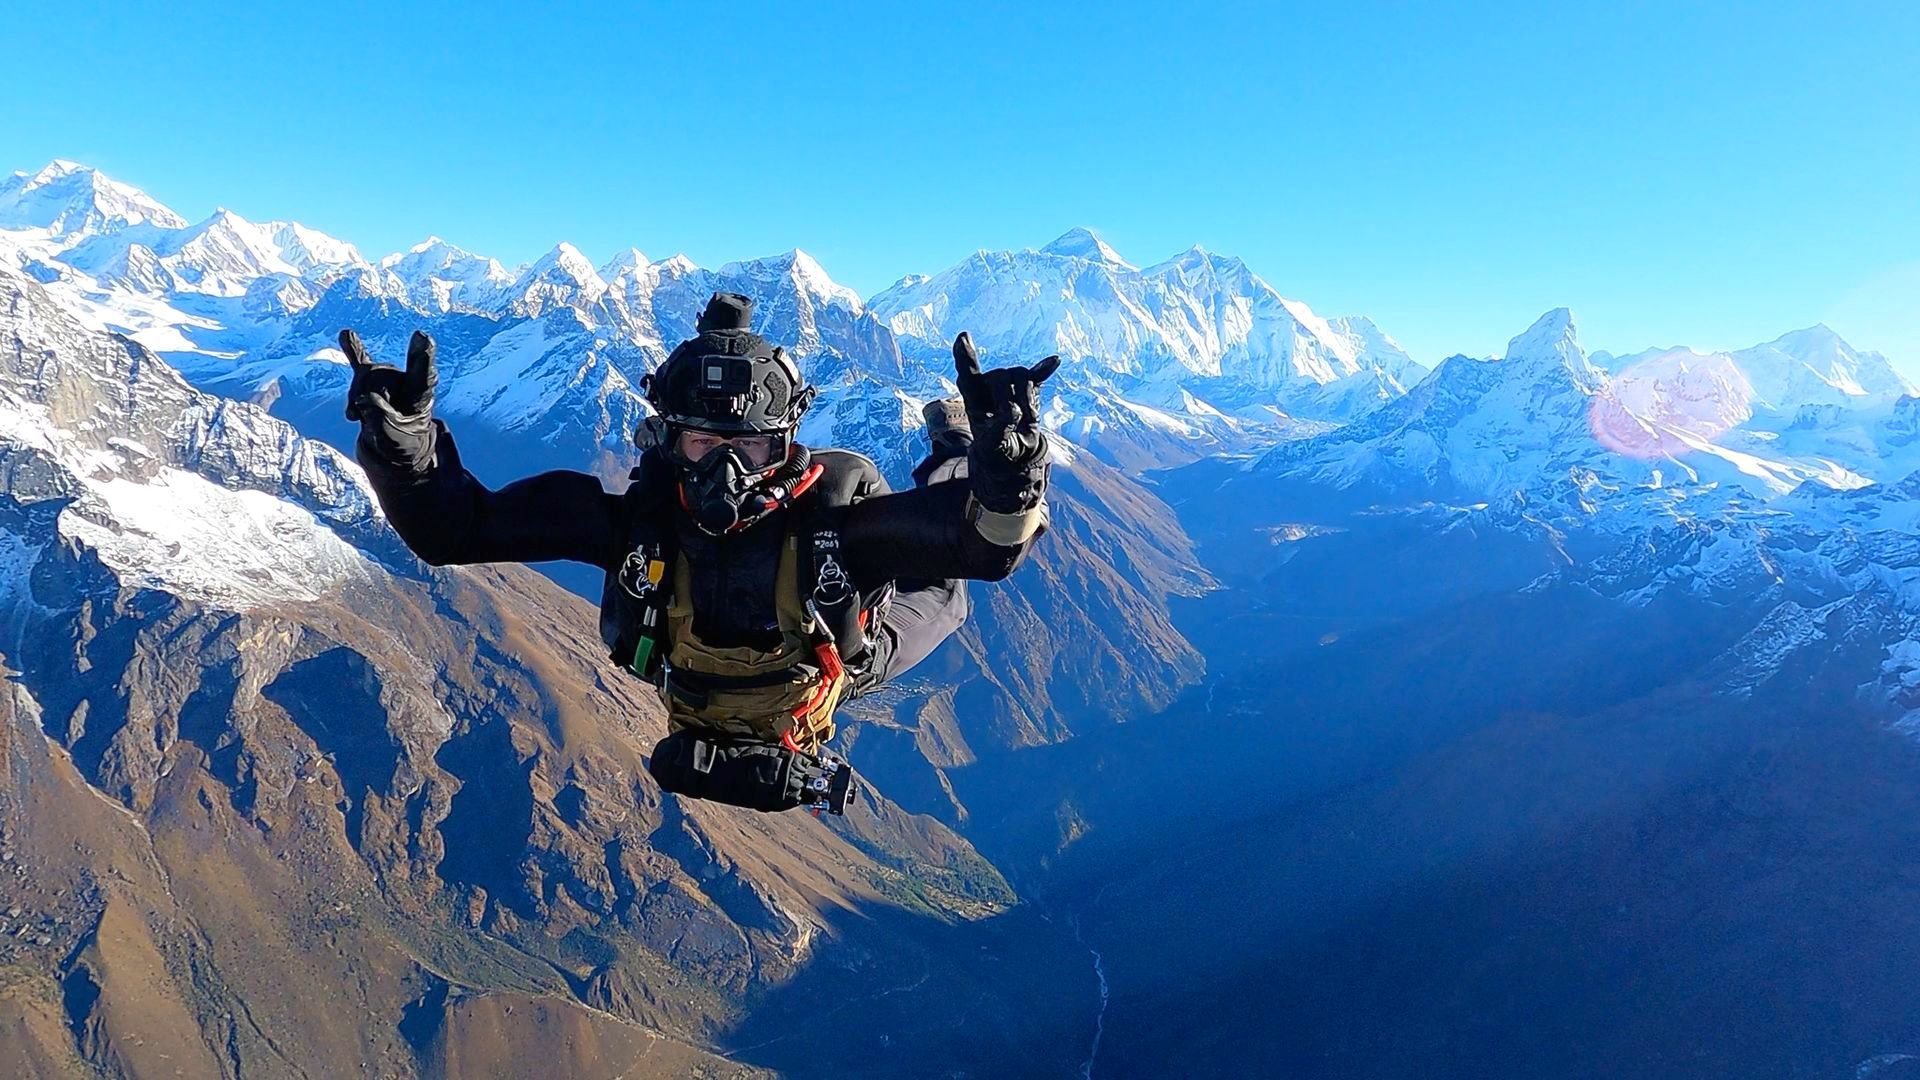 Fastest Time To Skydive Six Continents: Legacy Expeditions Skydiving Team sets world record﻿